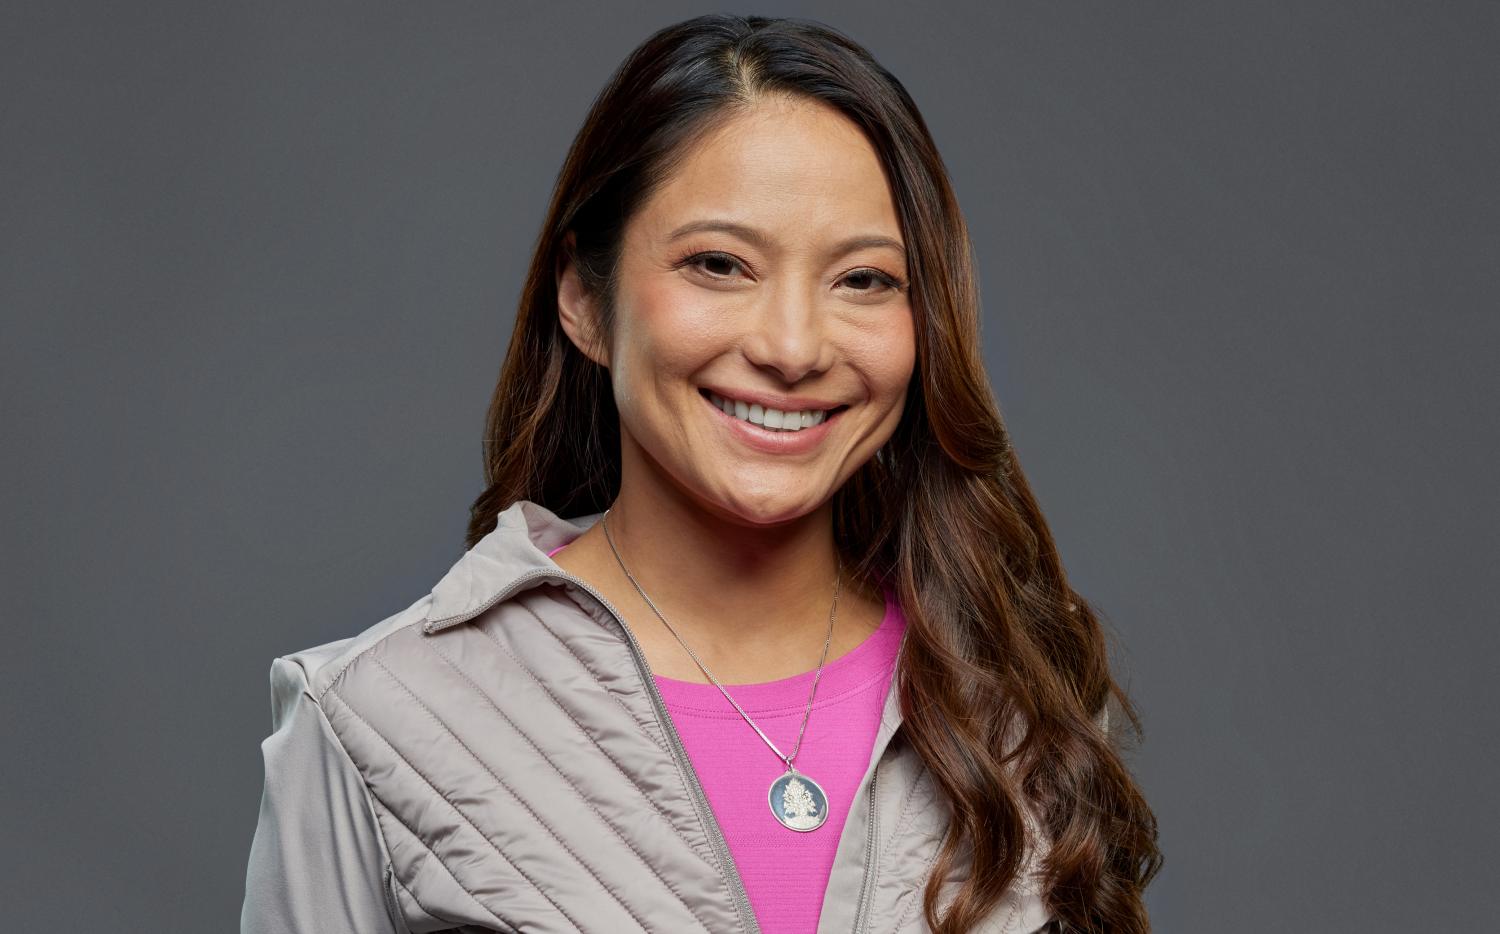 Nadia Hatta is "incredibly grateful" for her role in Hallmark's A Winning Team